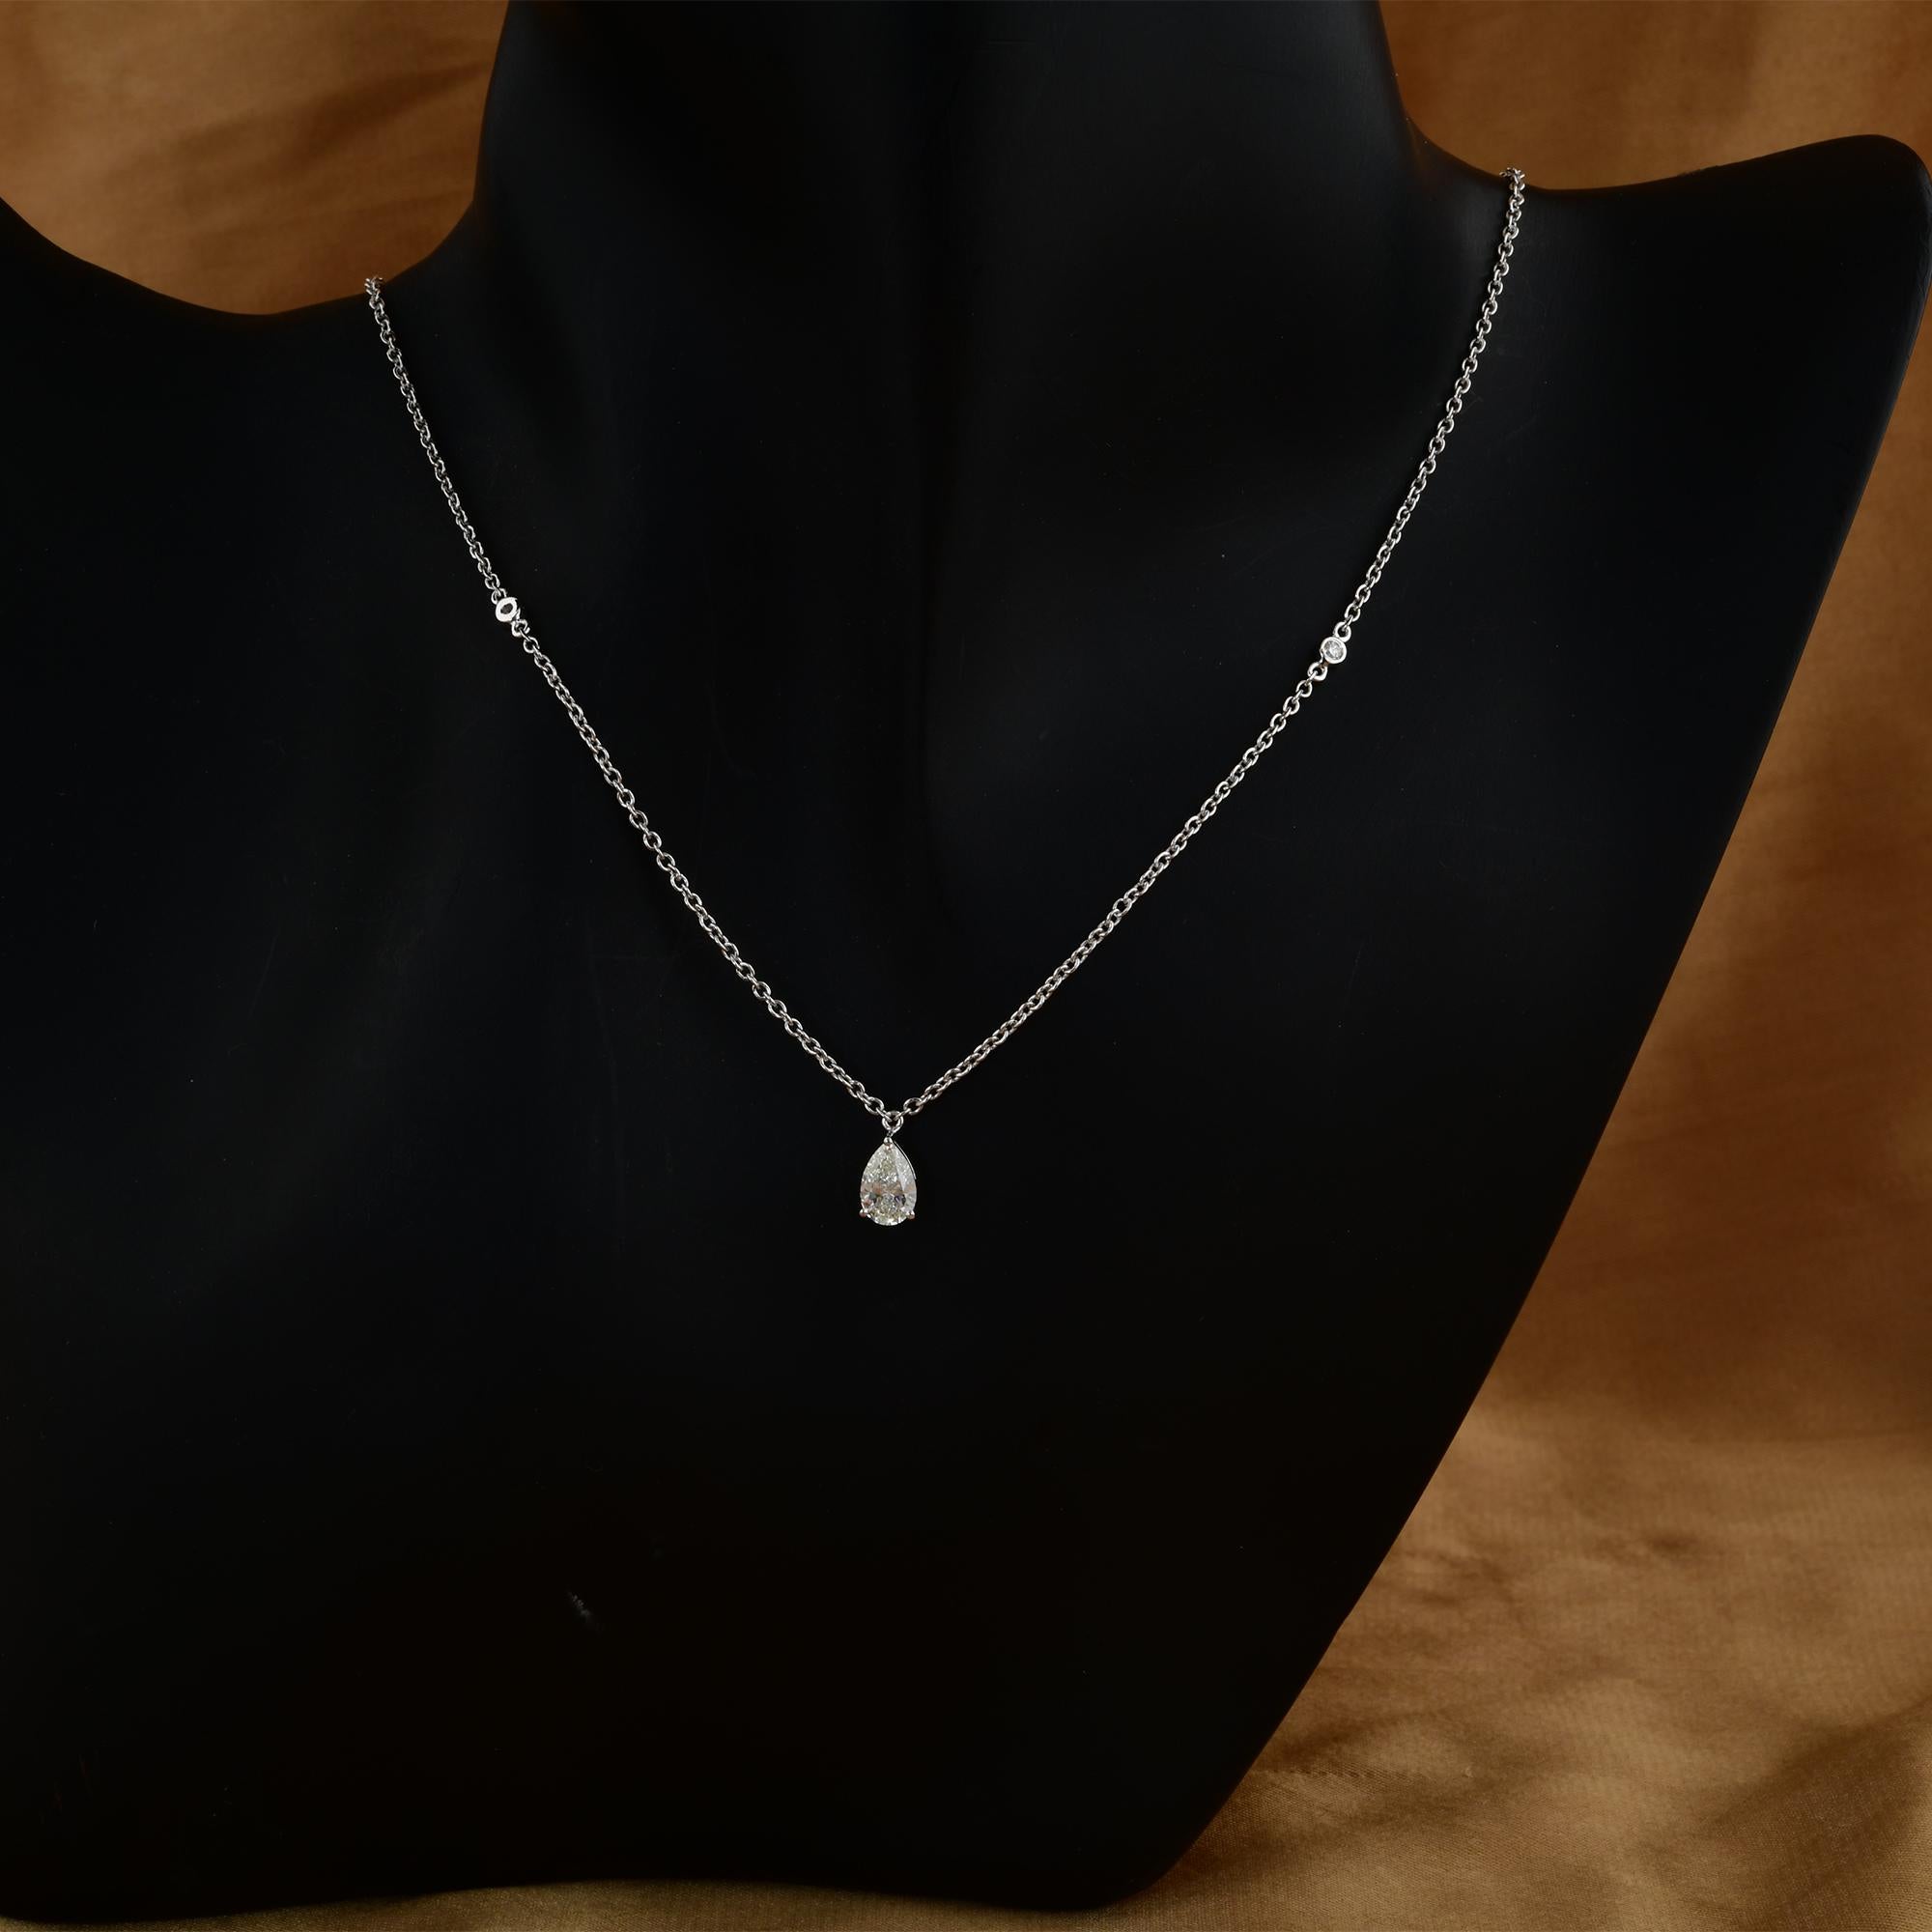 The centerpiece of this necklace is a beautiful pear-shaped diamond, radiating brilliance and allure. Surrounding the pear diamond are delicately arranged round diamonds, each meticulously set to enhance the overall sparkle and beauty of the